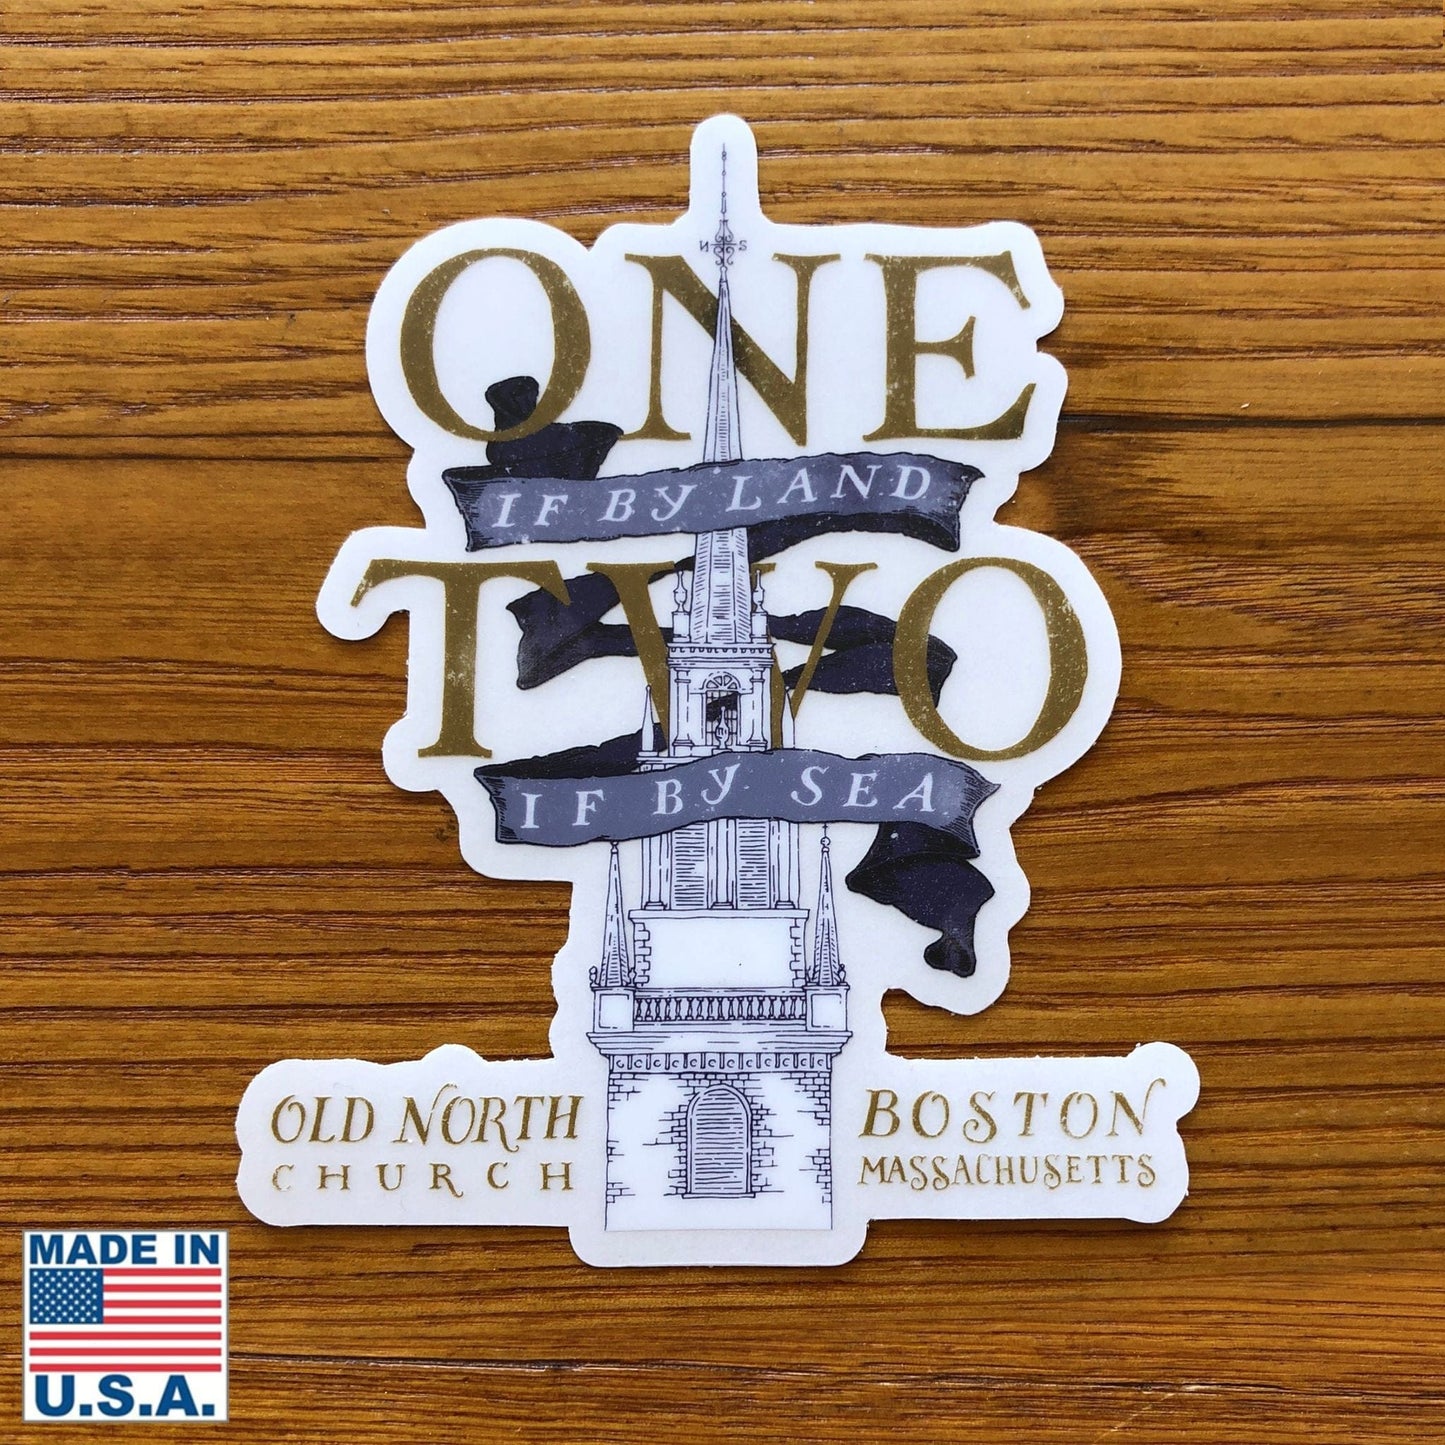 "One if by land . . ." die cut sticker from The History List Store